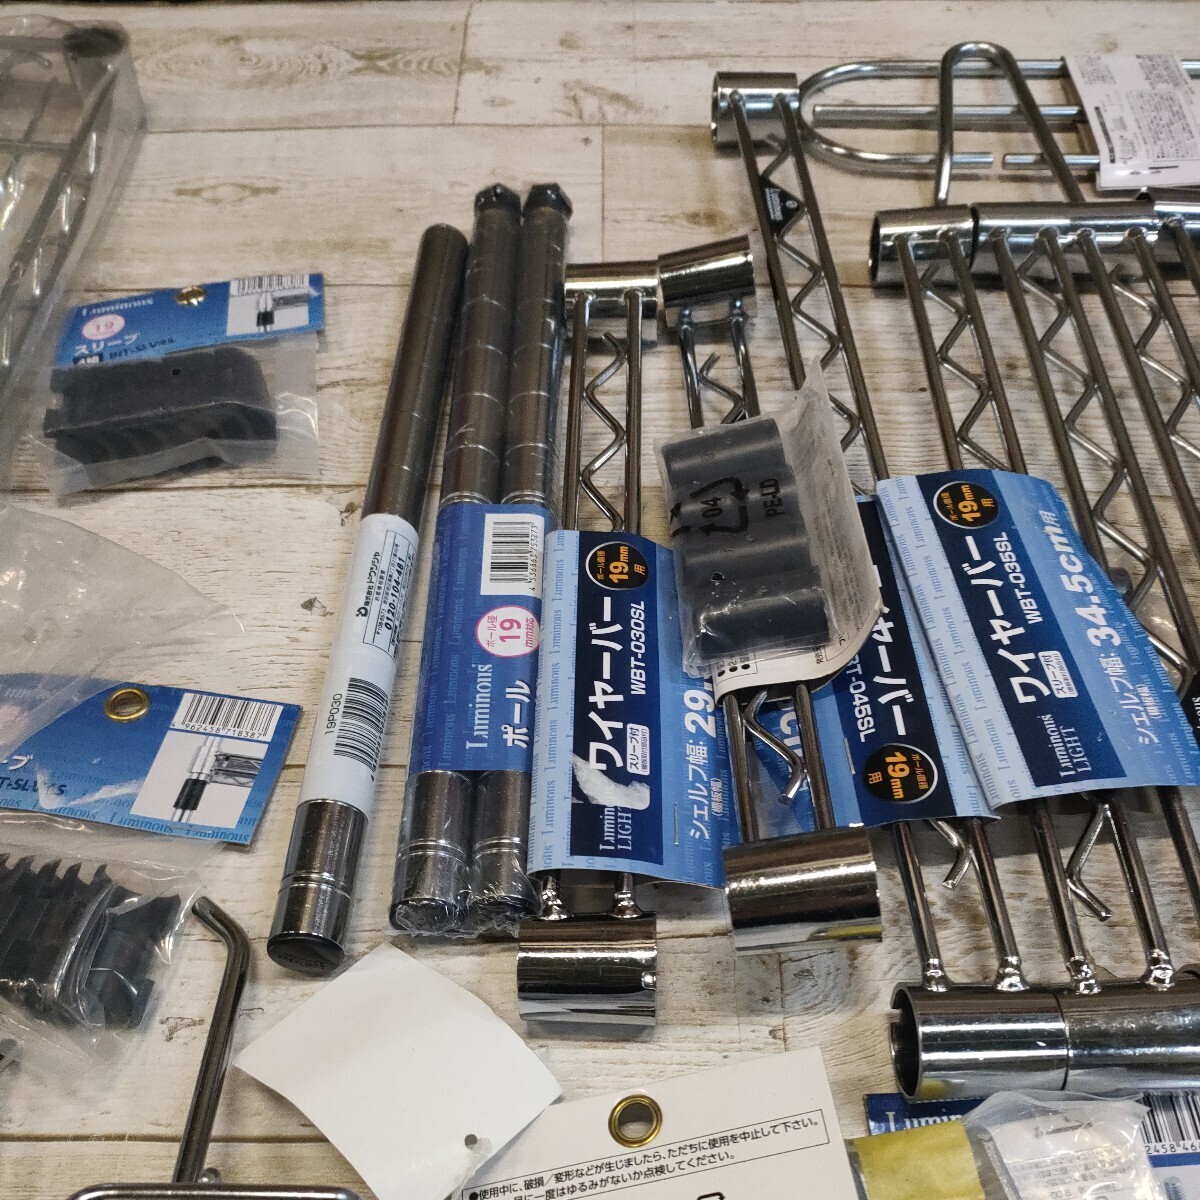 0604/2408 together ruminas metal rack parts wire bar / adjuster / caster / table / sleeve including in a package un- possible 